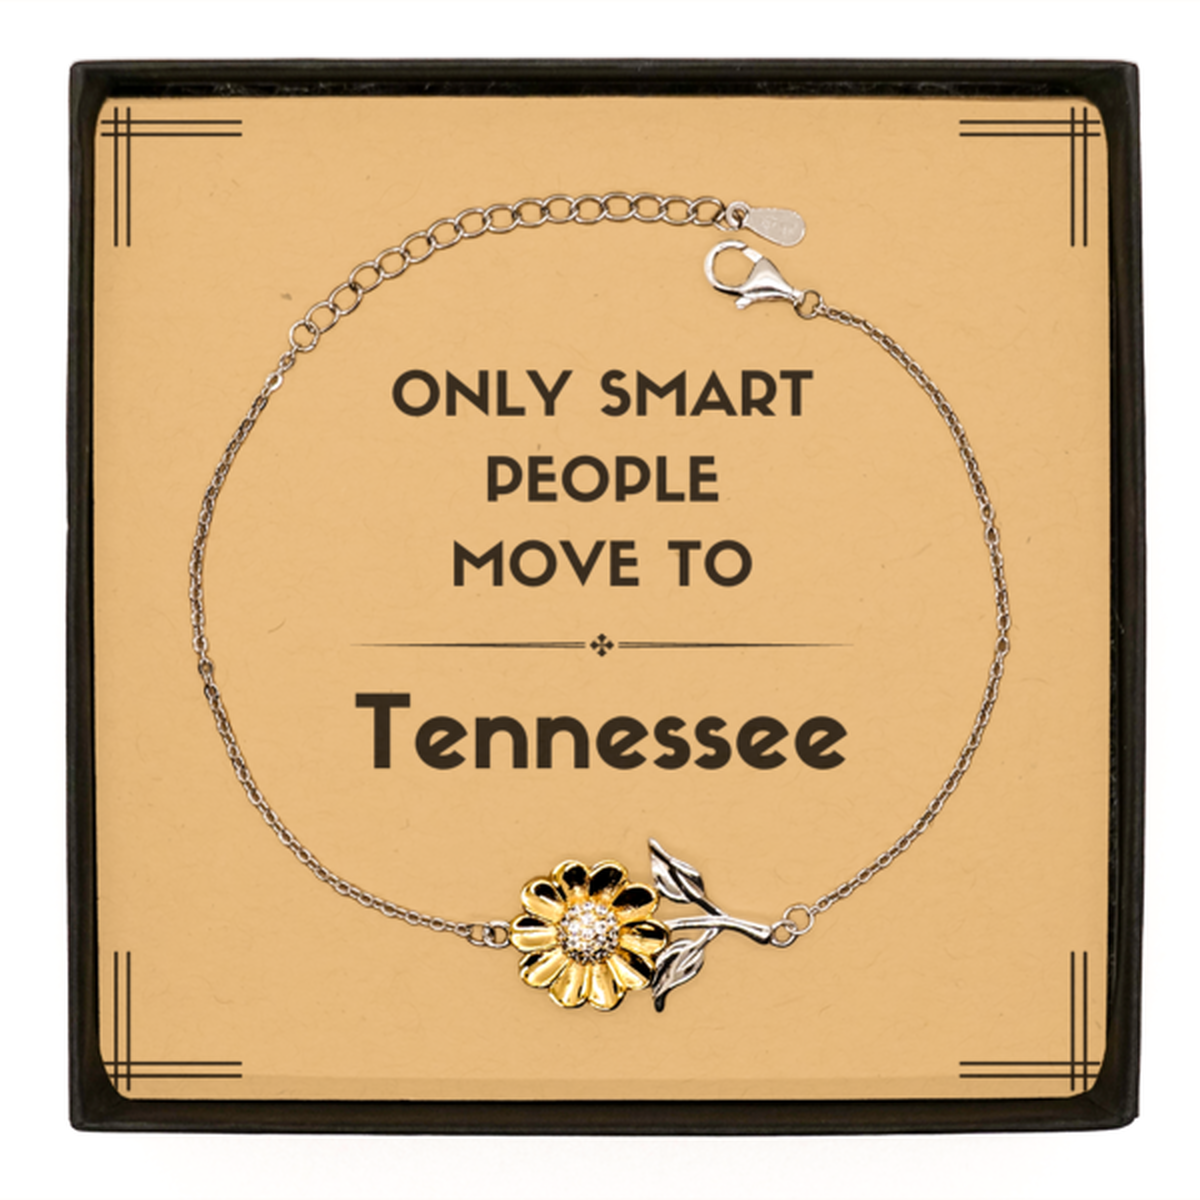 Only smart people move to Tennessee Sunflower Bracelet, Message Card Gifts For Tennessee, Move to Tennessee Gifts for Friends Coworker Funny Saying Quote